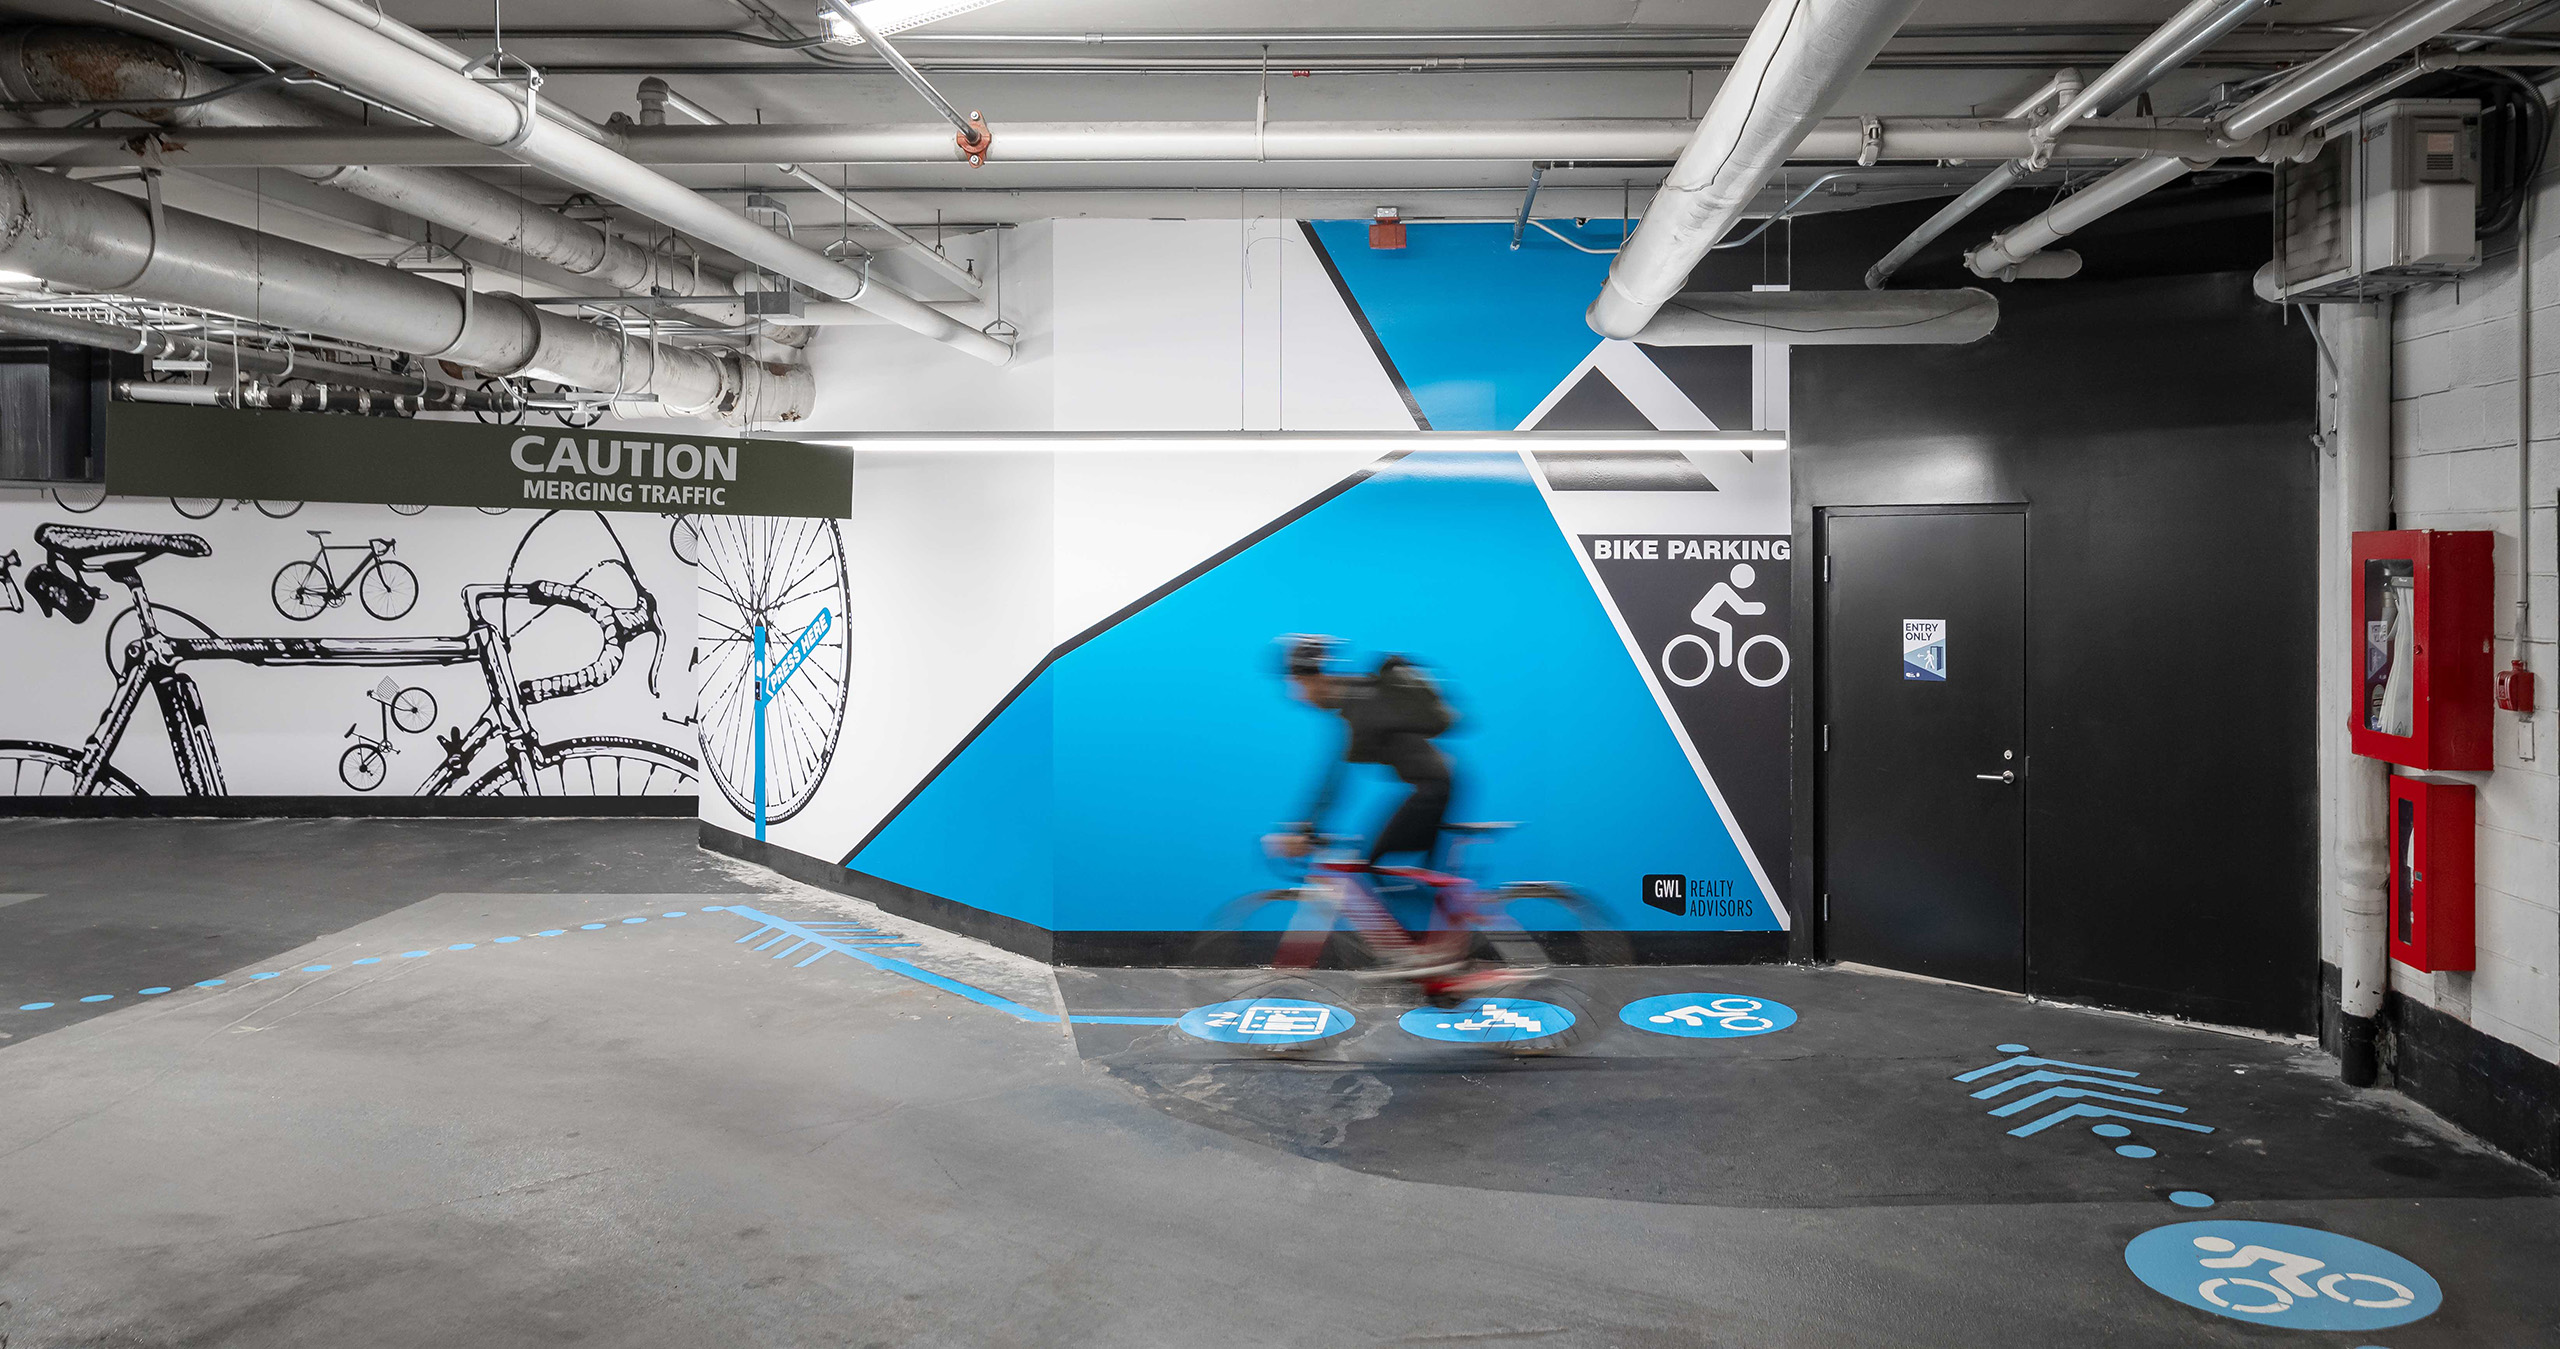 A bicyclist cycles into the bike amenities area, following bold graphics to ensure safe wayfinding